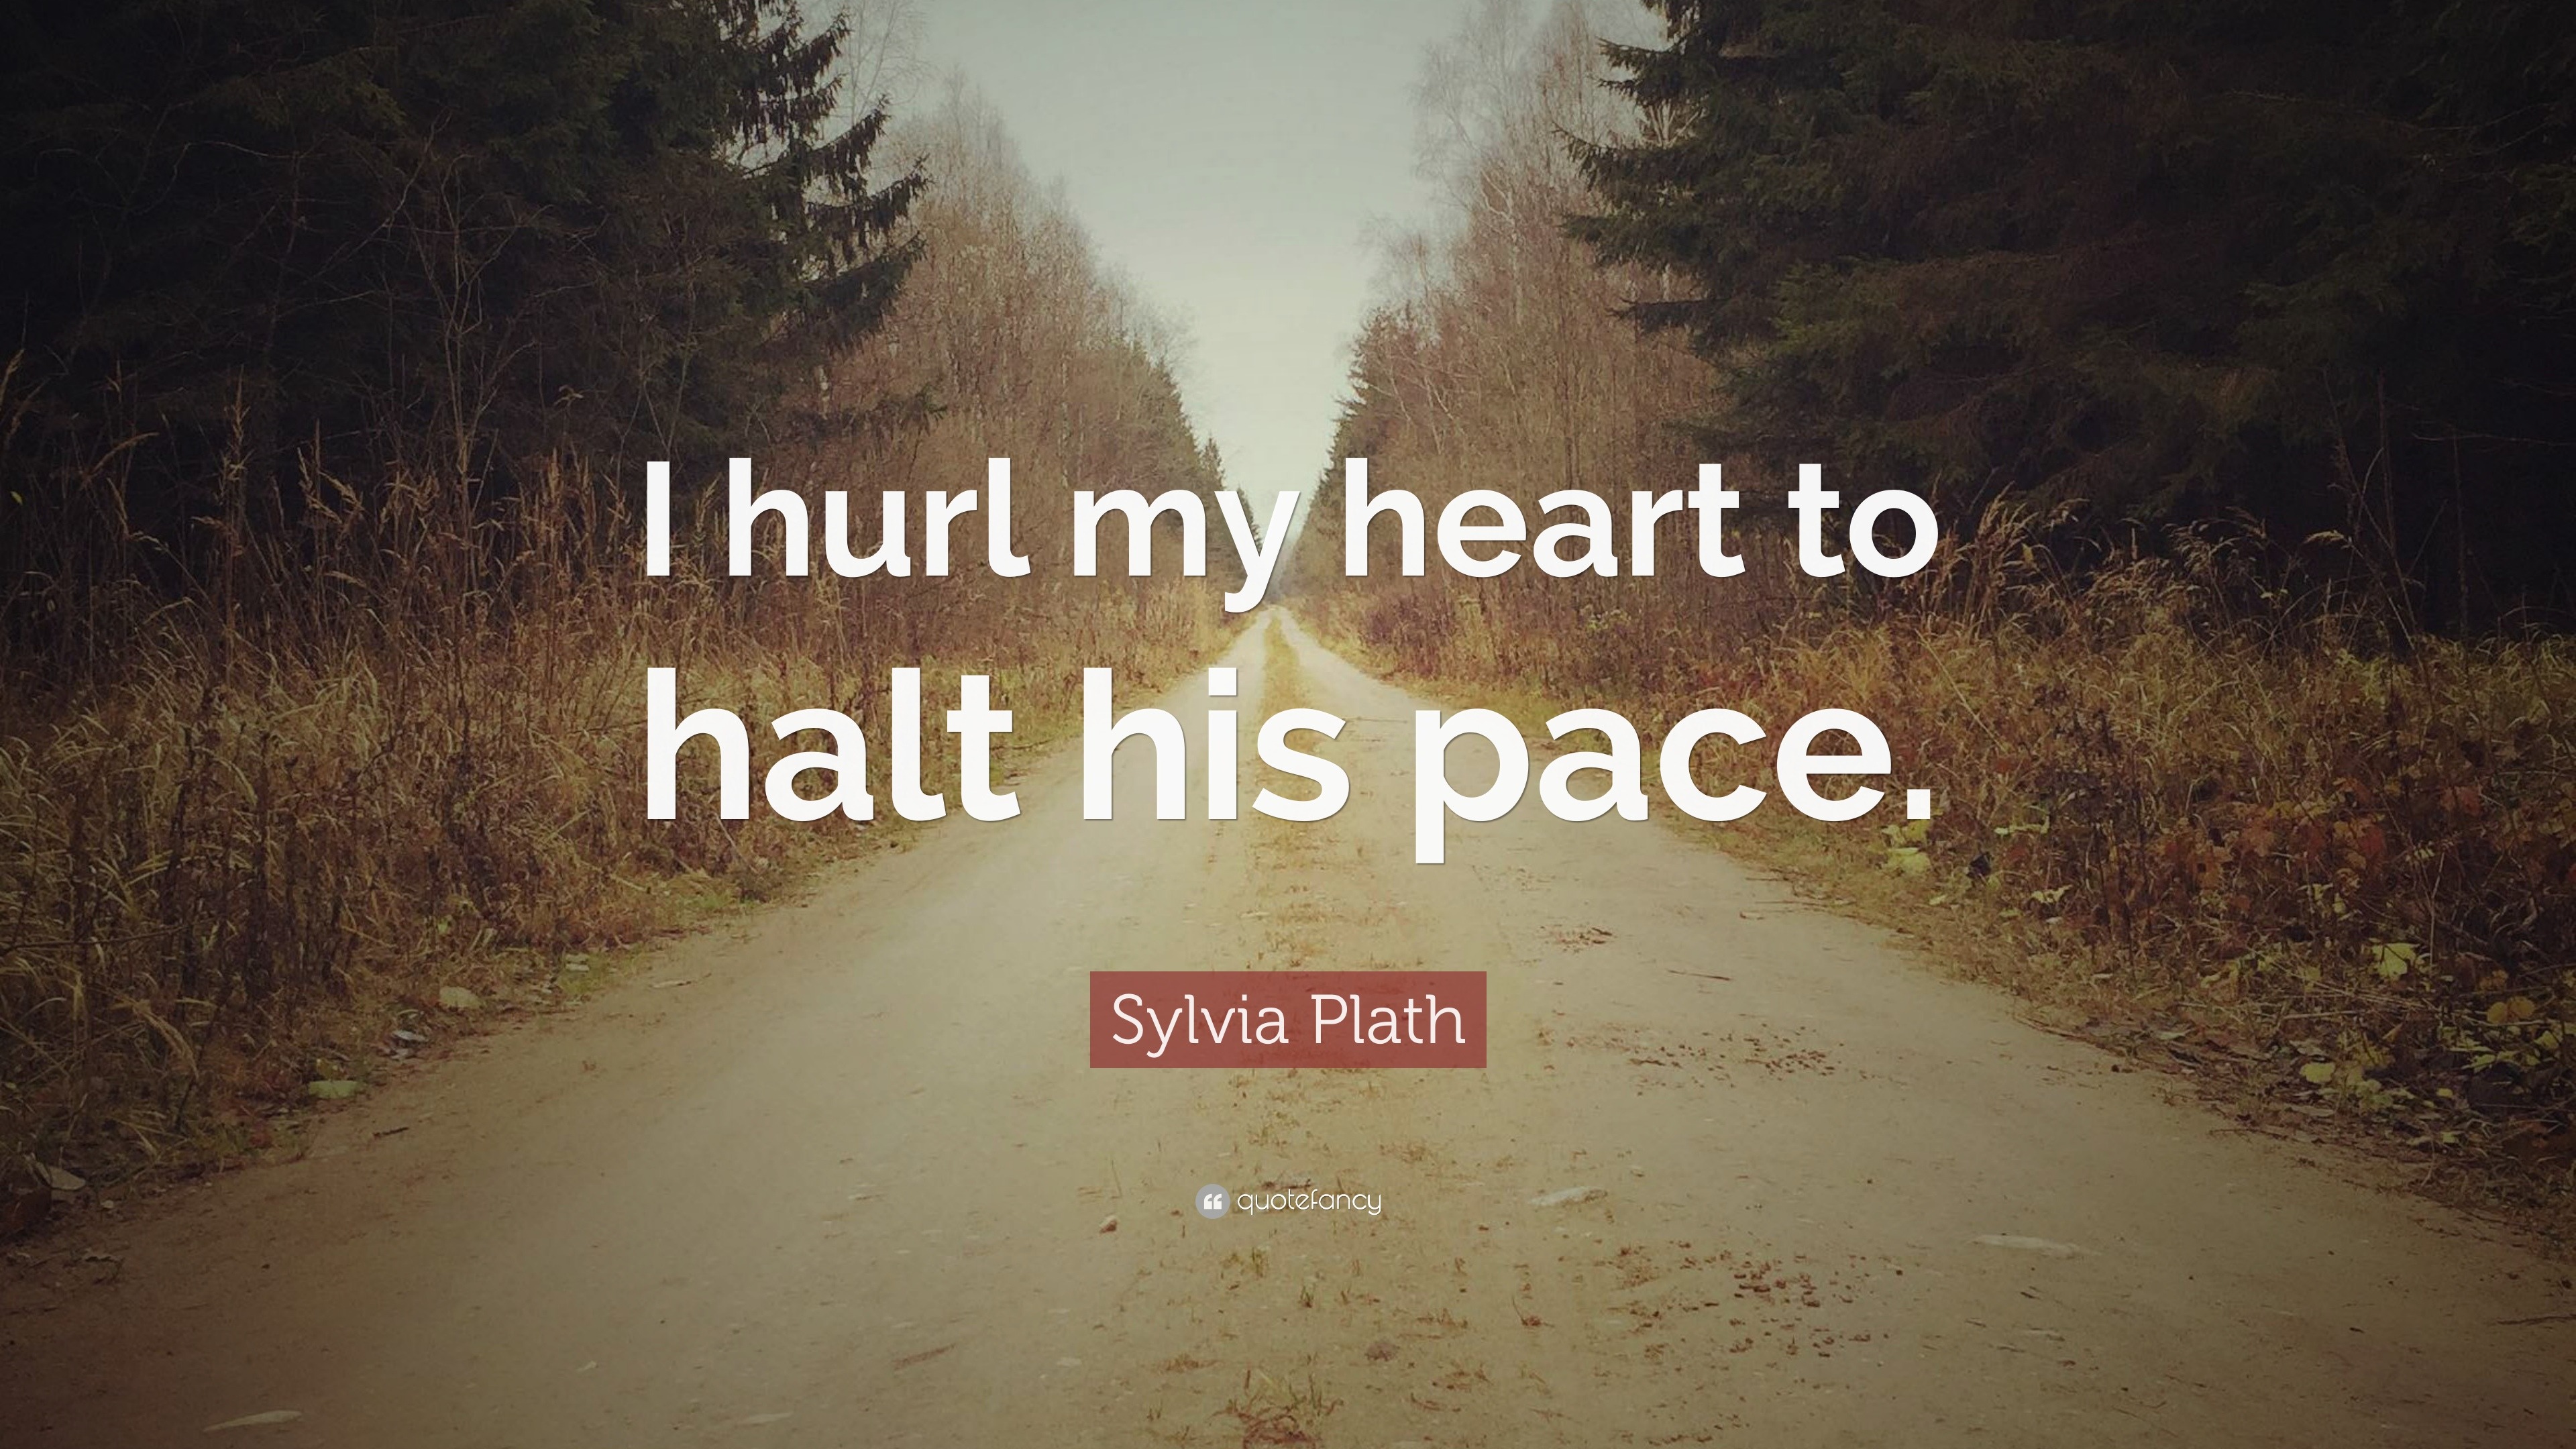 Sylvia Plath Quote: “I hurl my heart to halt his pace.”